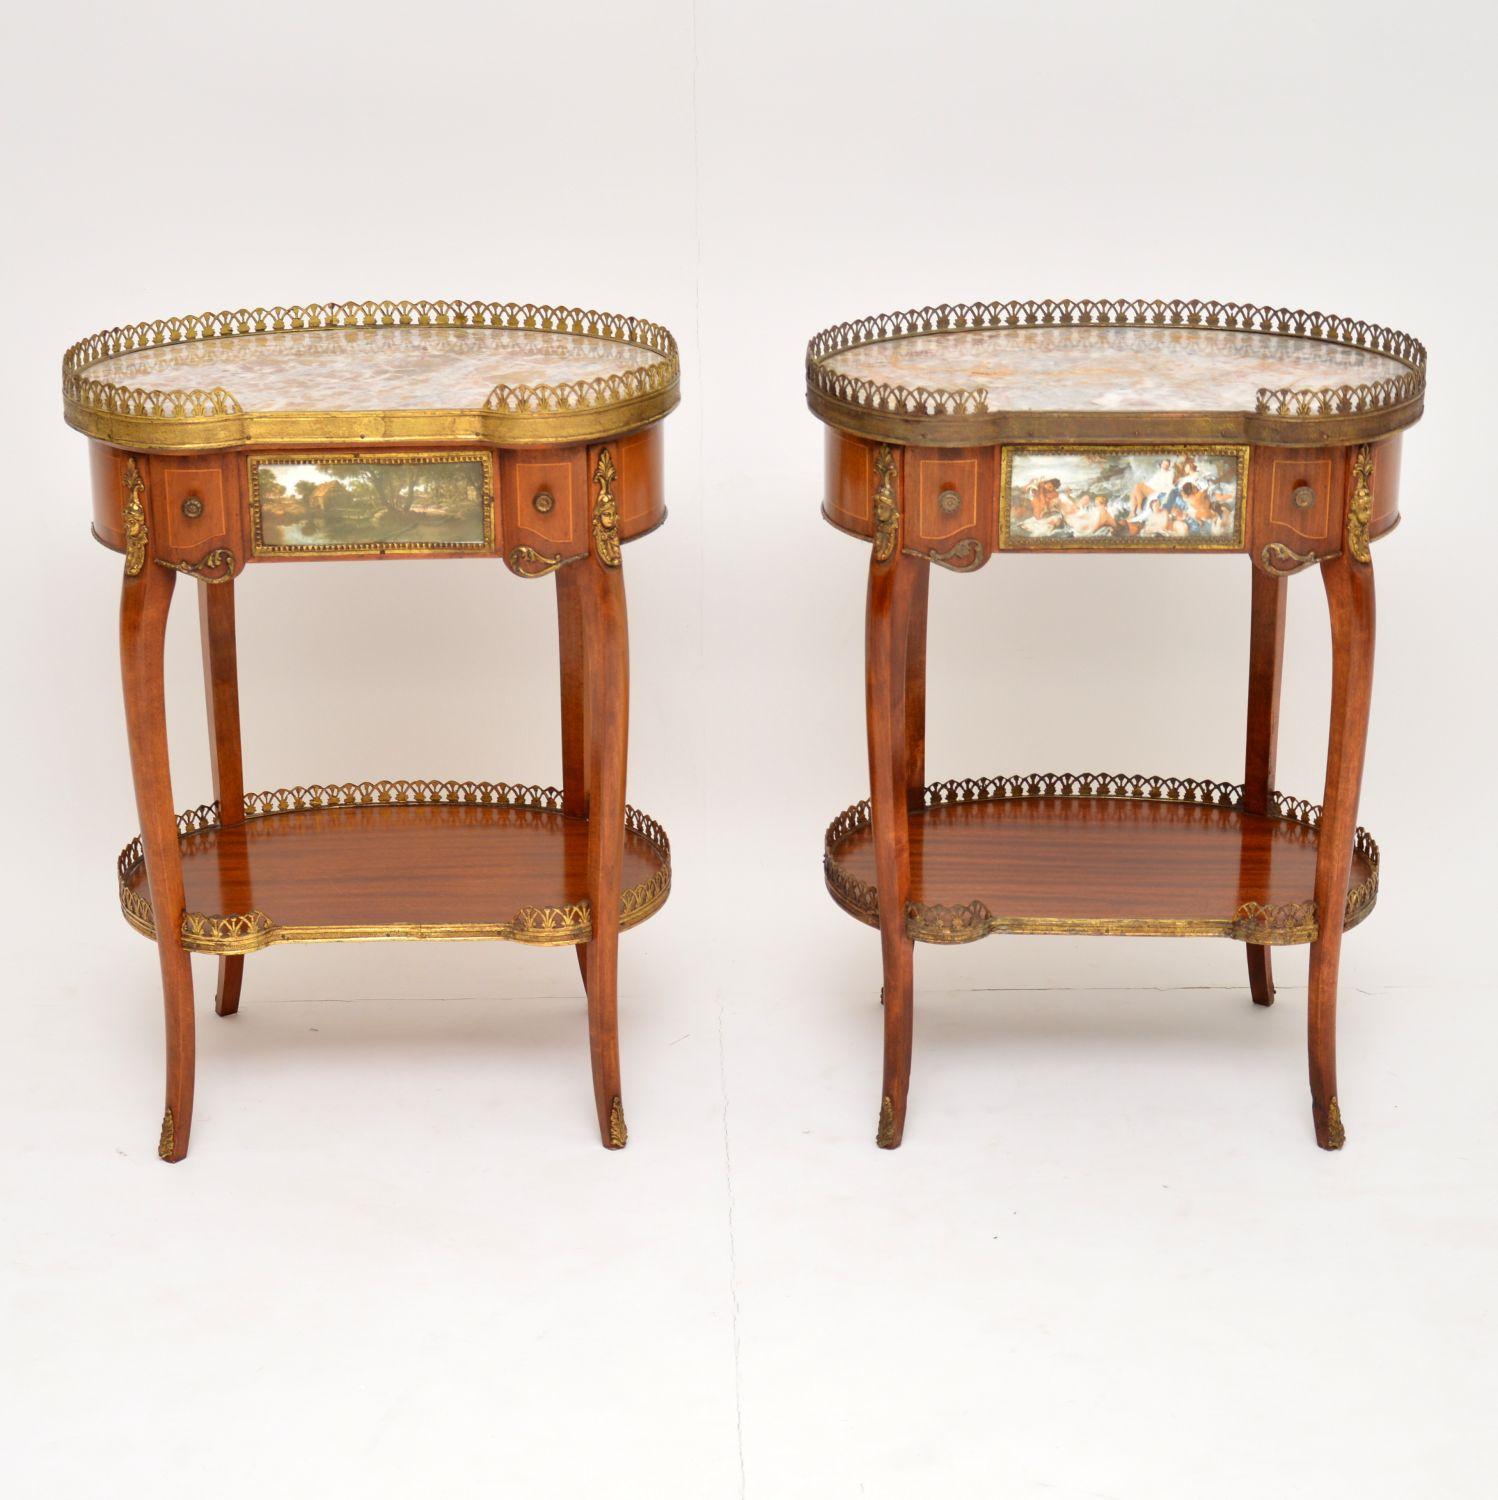 Pair of antique French kidney shaped marble top side tables in good original condition and with lots of character. These tables have pierced gilt bronze galleries around the top and bottom levels. They also have other gilt bronze mounts, handles and